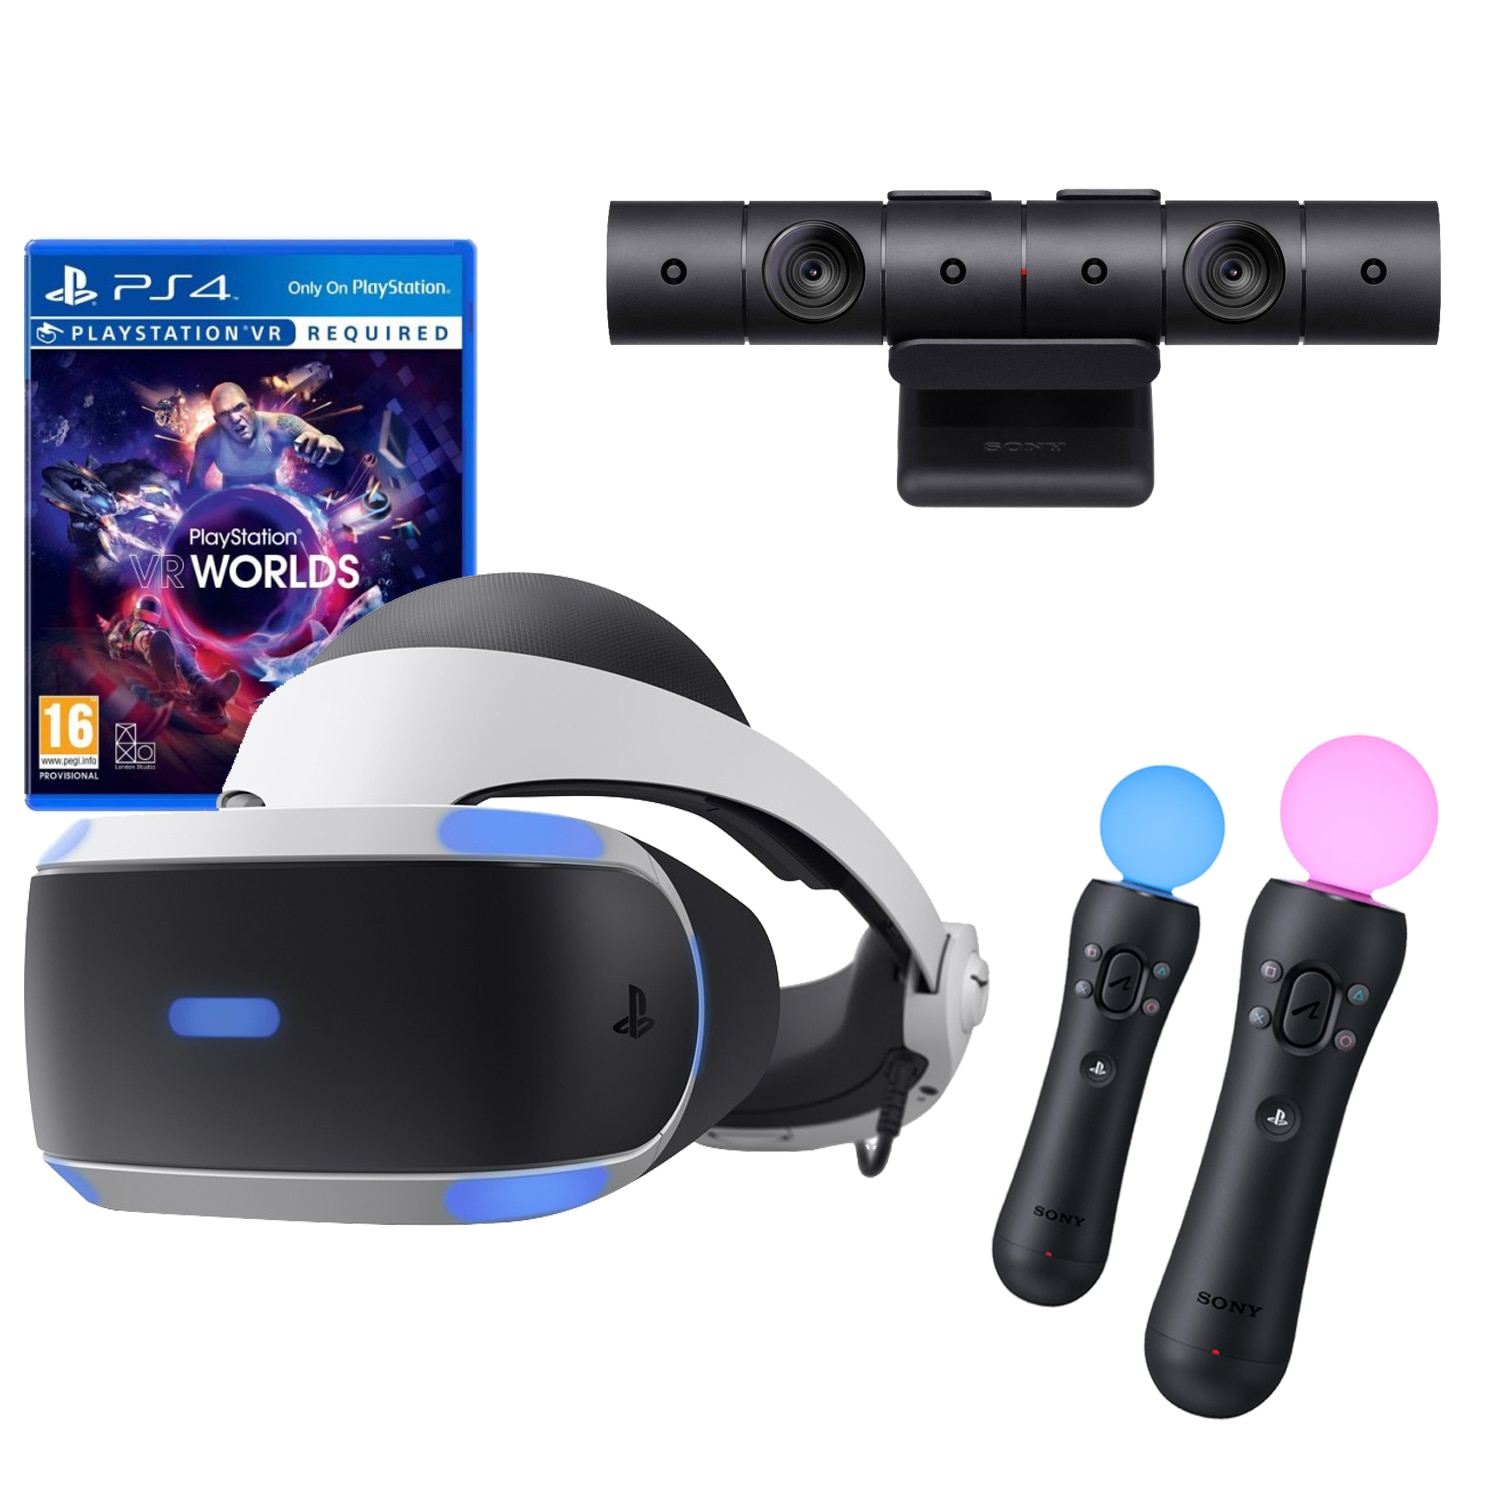 Sony PlayStation 4 5 PS4 VR v2 Virtual Reality Headset with Camera games  PSVR, vr ps4 